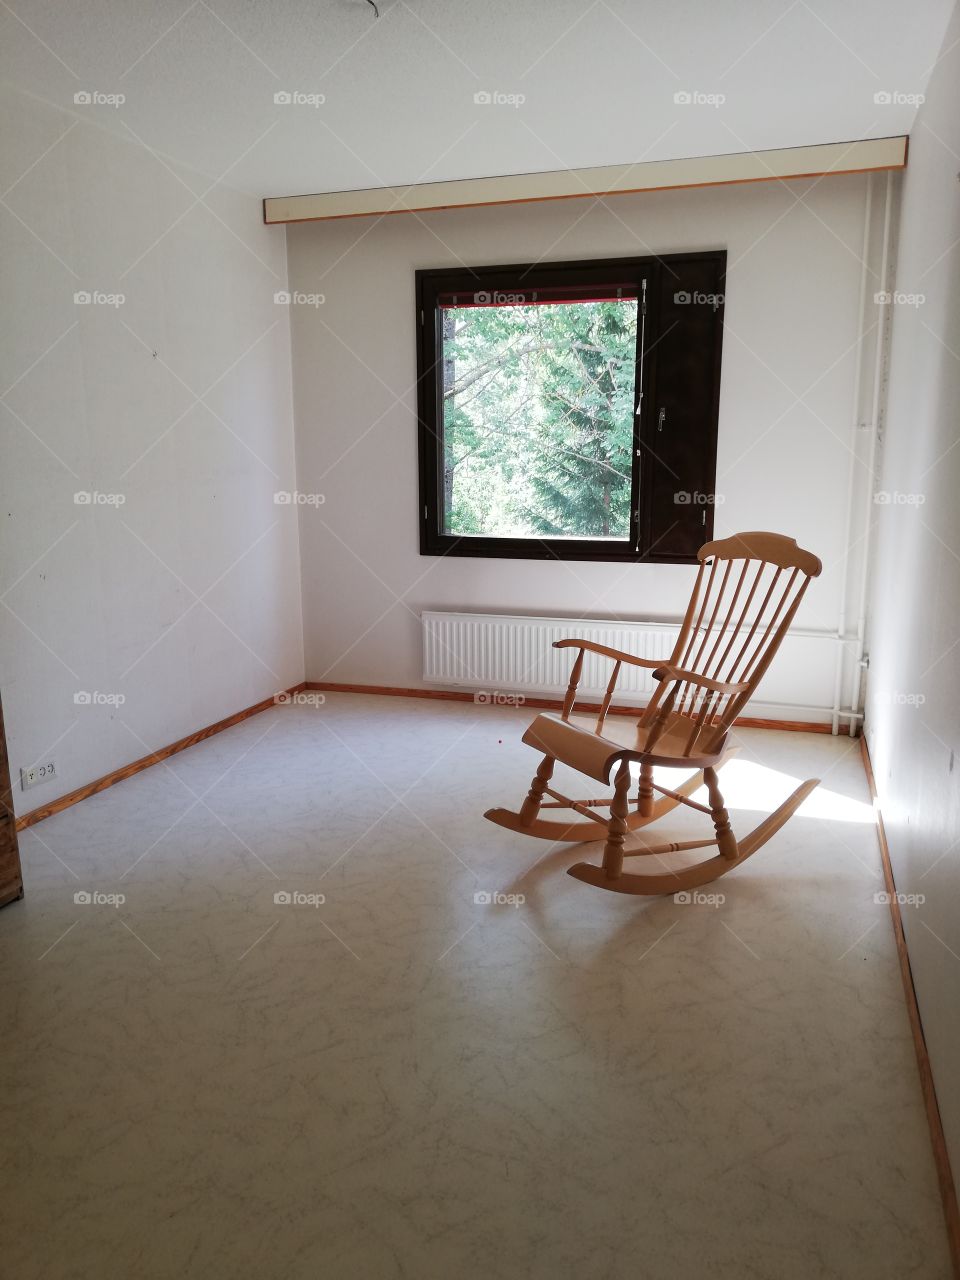 A beige rocking chair made of varnished wood is standing in an empty room. The walls, a ceiling and a heater are white, patterned plastic mat. Light colors all over the room, except brown fortochka and window frames.